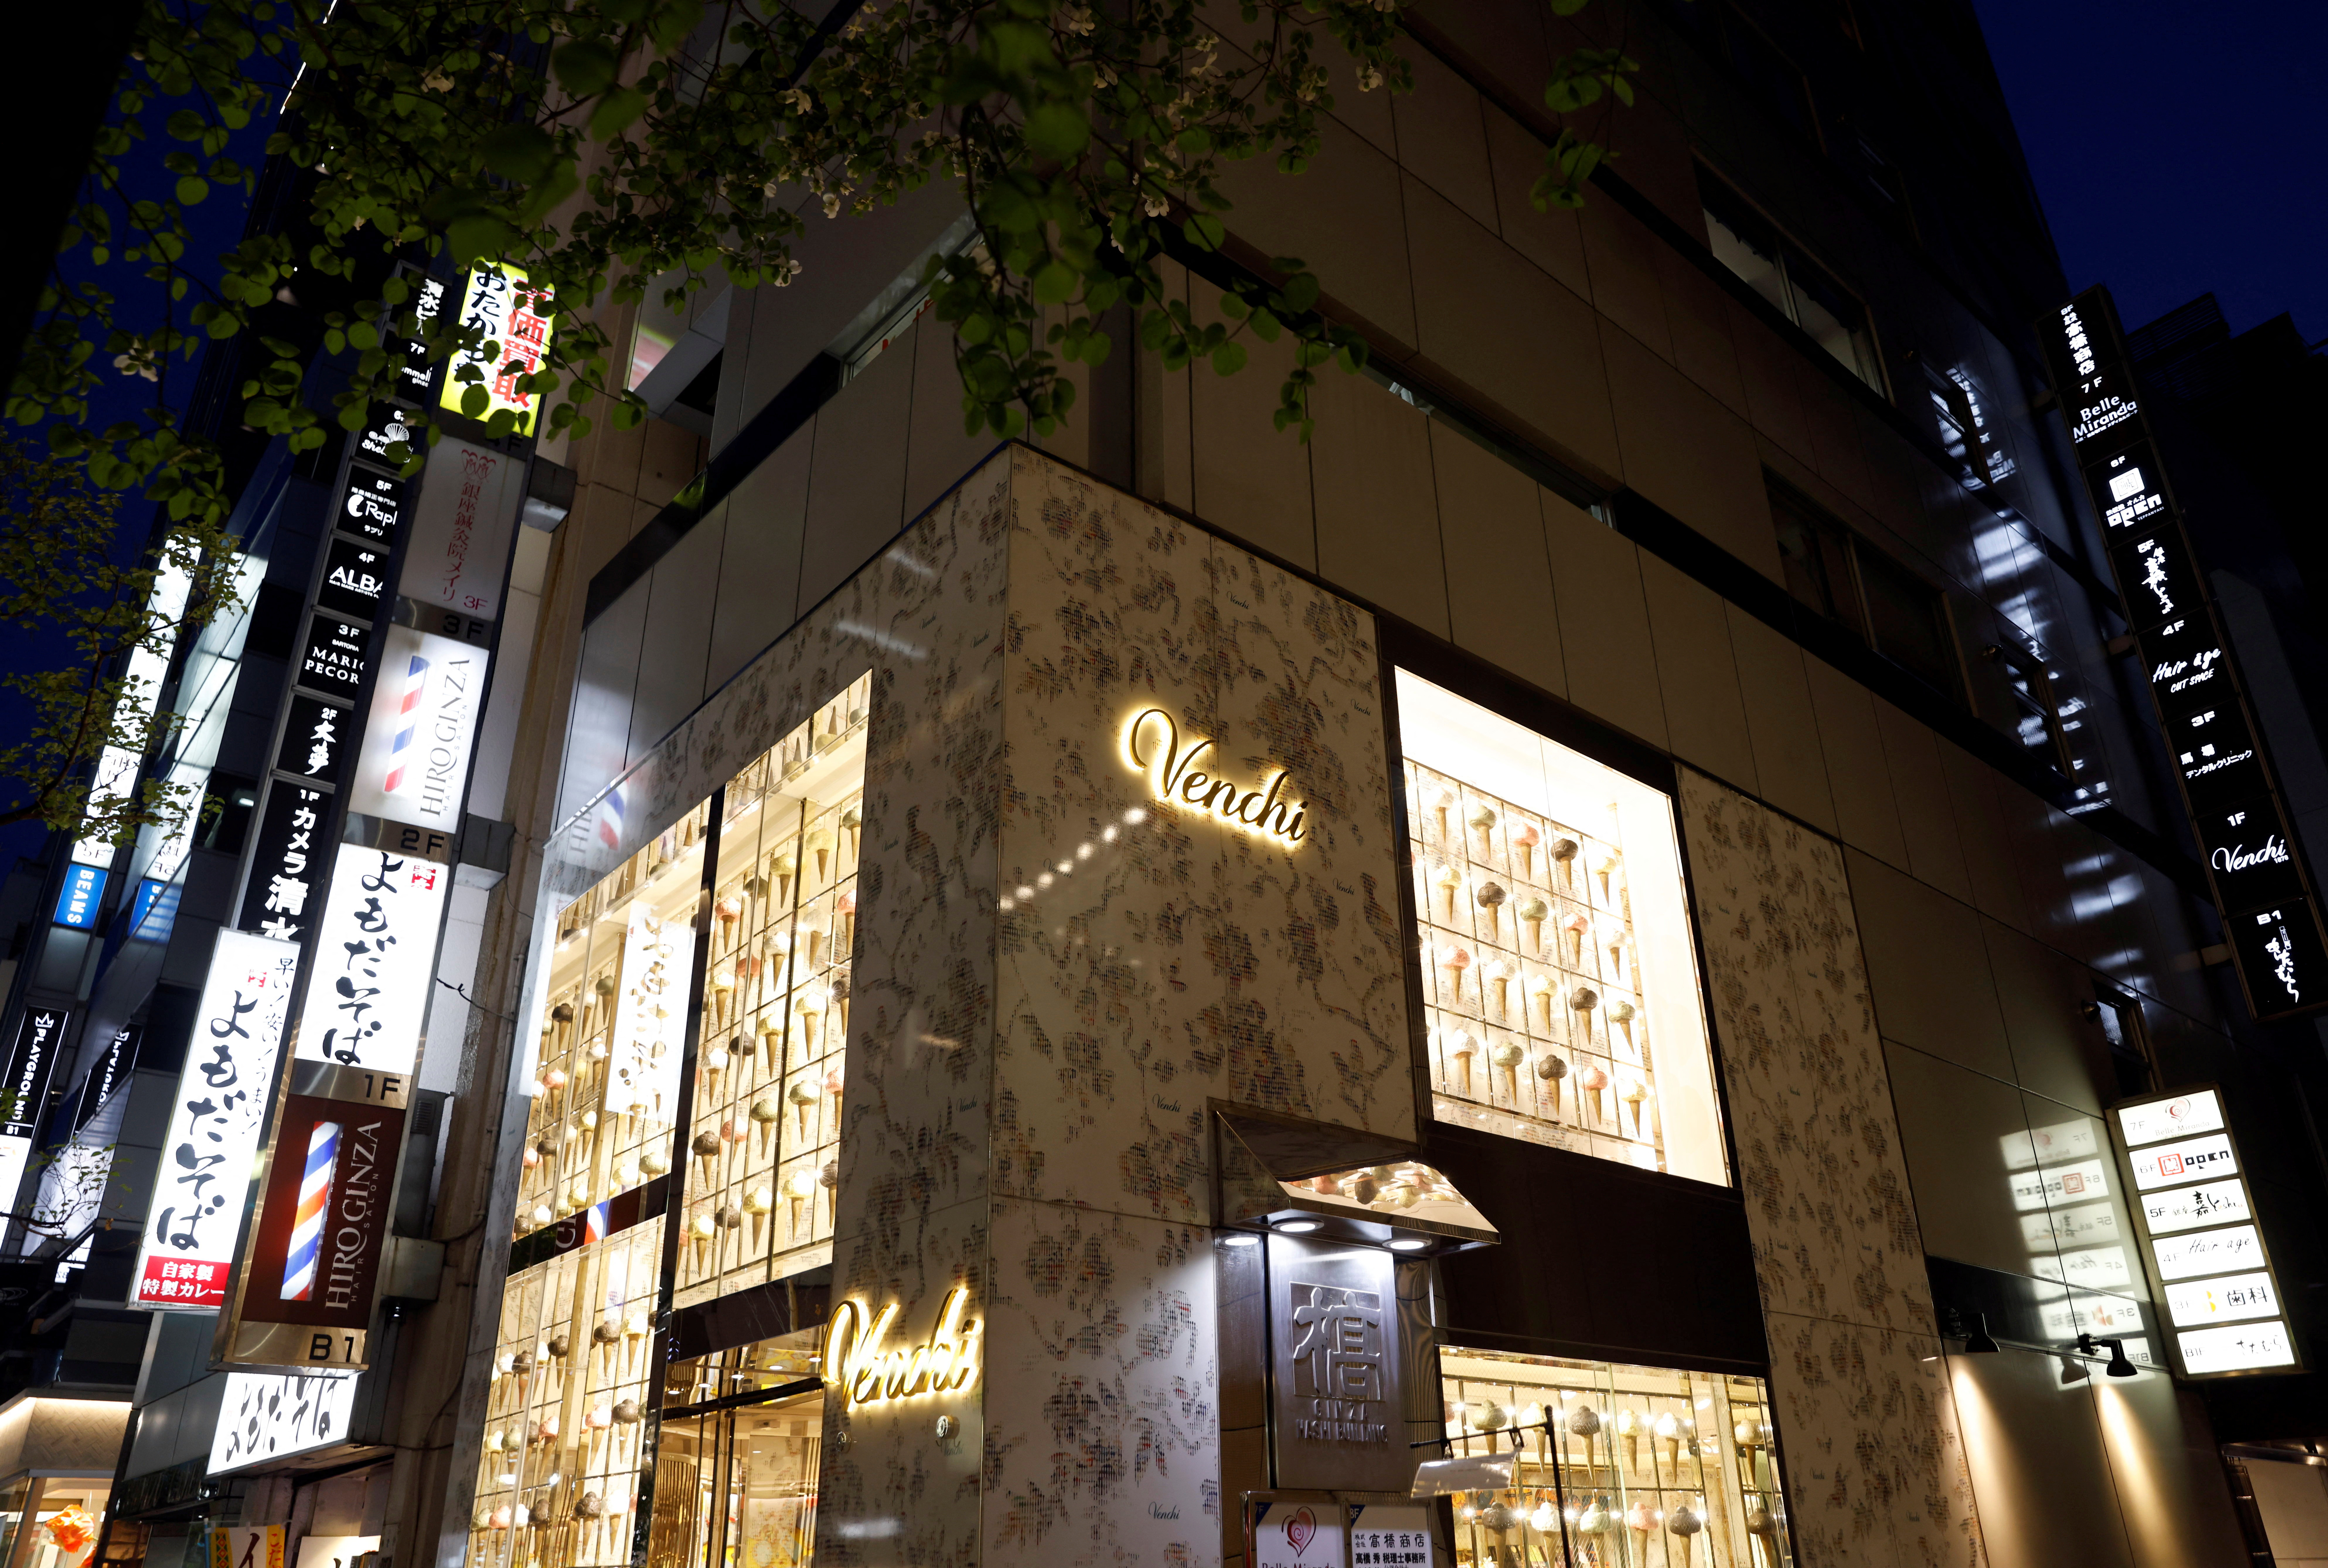 Venchi Ginza, a chocolate and ice cream shop operated by Italian chocolate shop Venchi, is seen in Tokyo